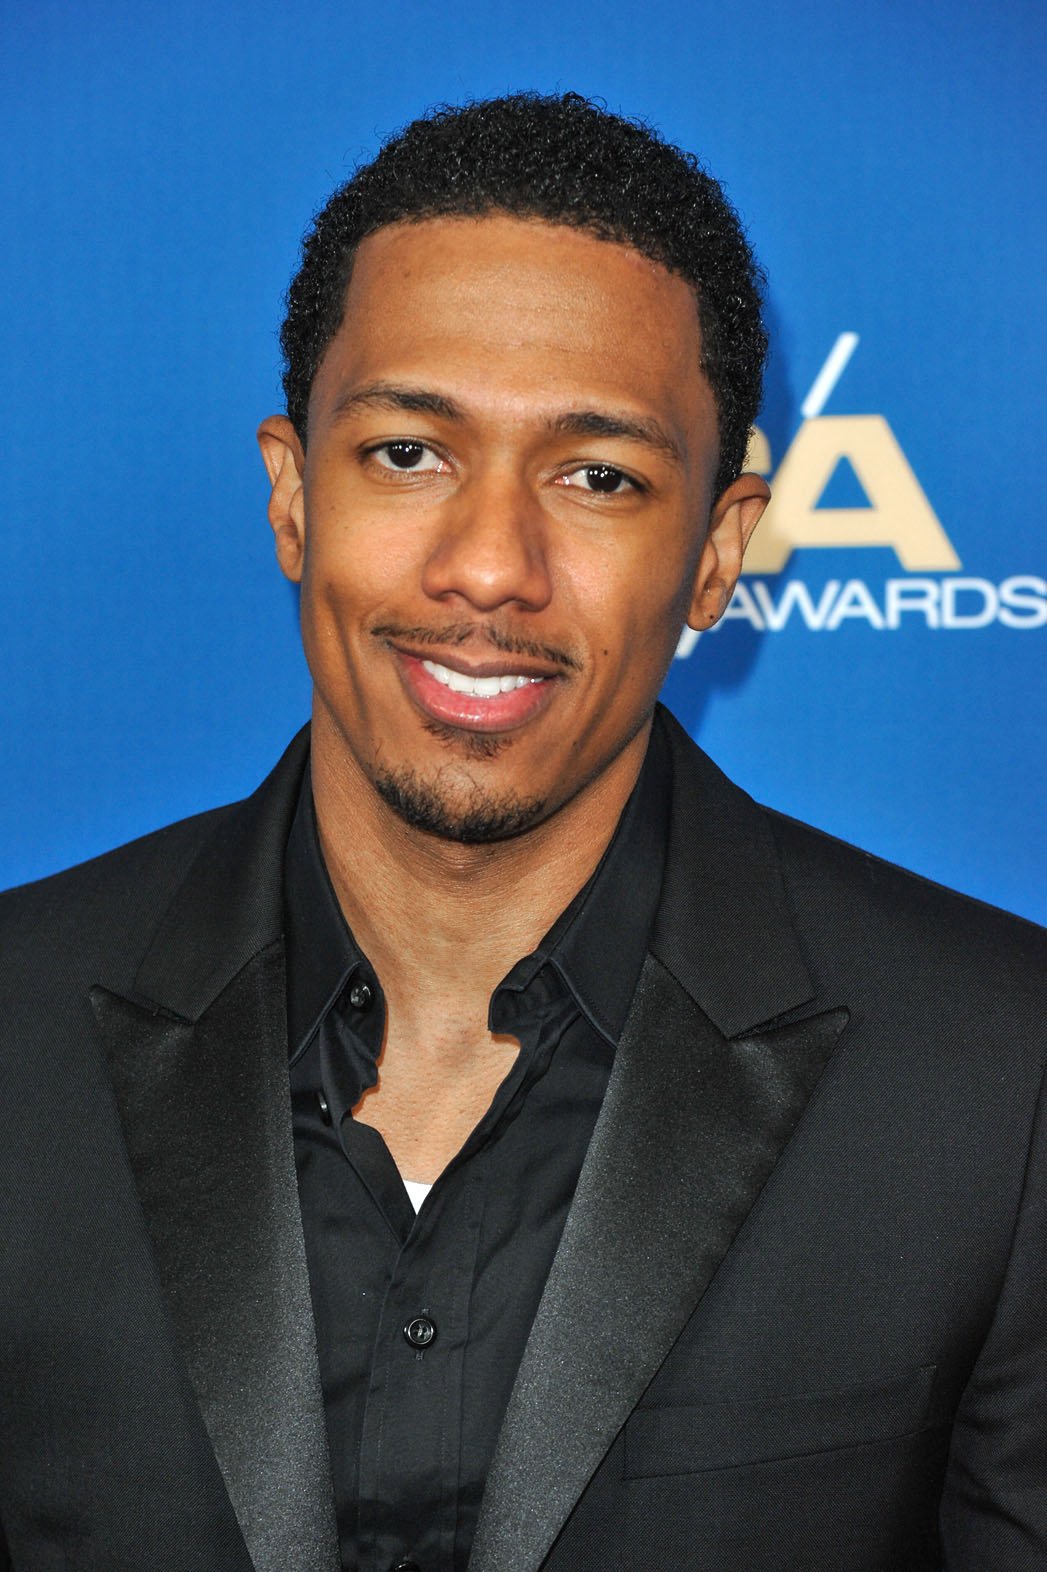 NBC Revives ‘Lifestyles of the Rich and Famous’ With Nick Cannon